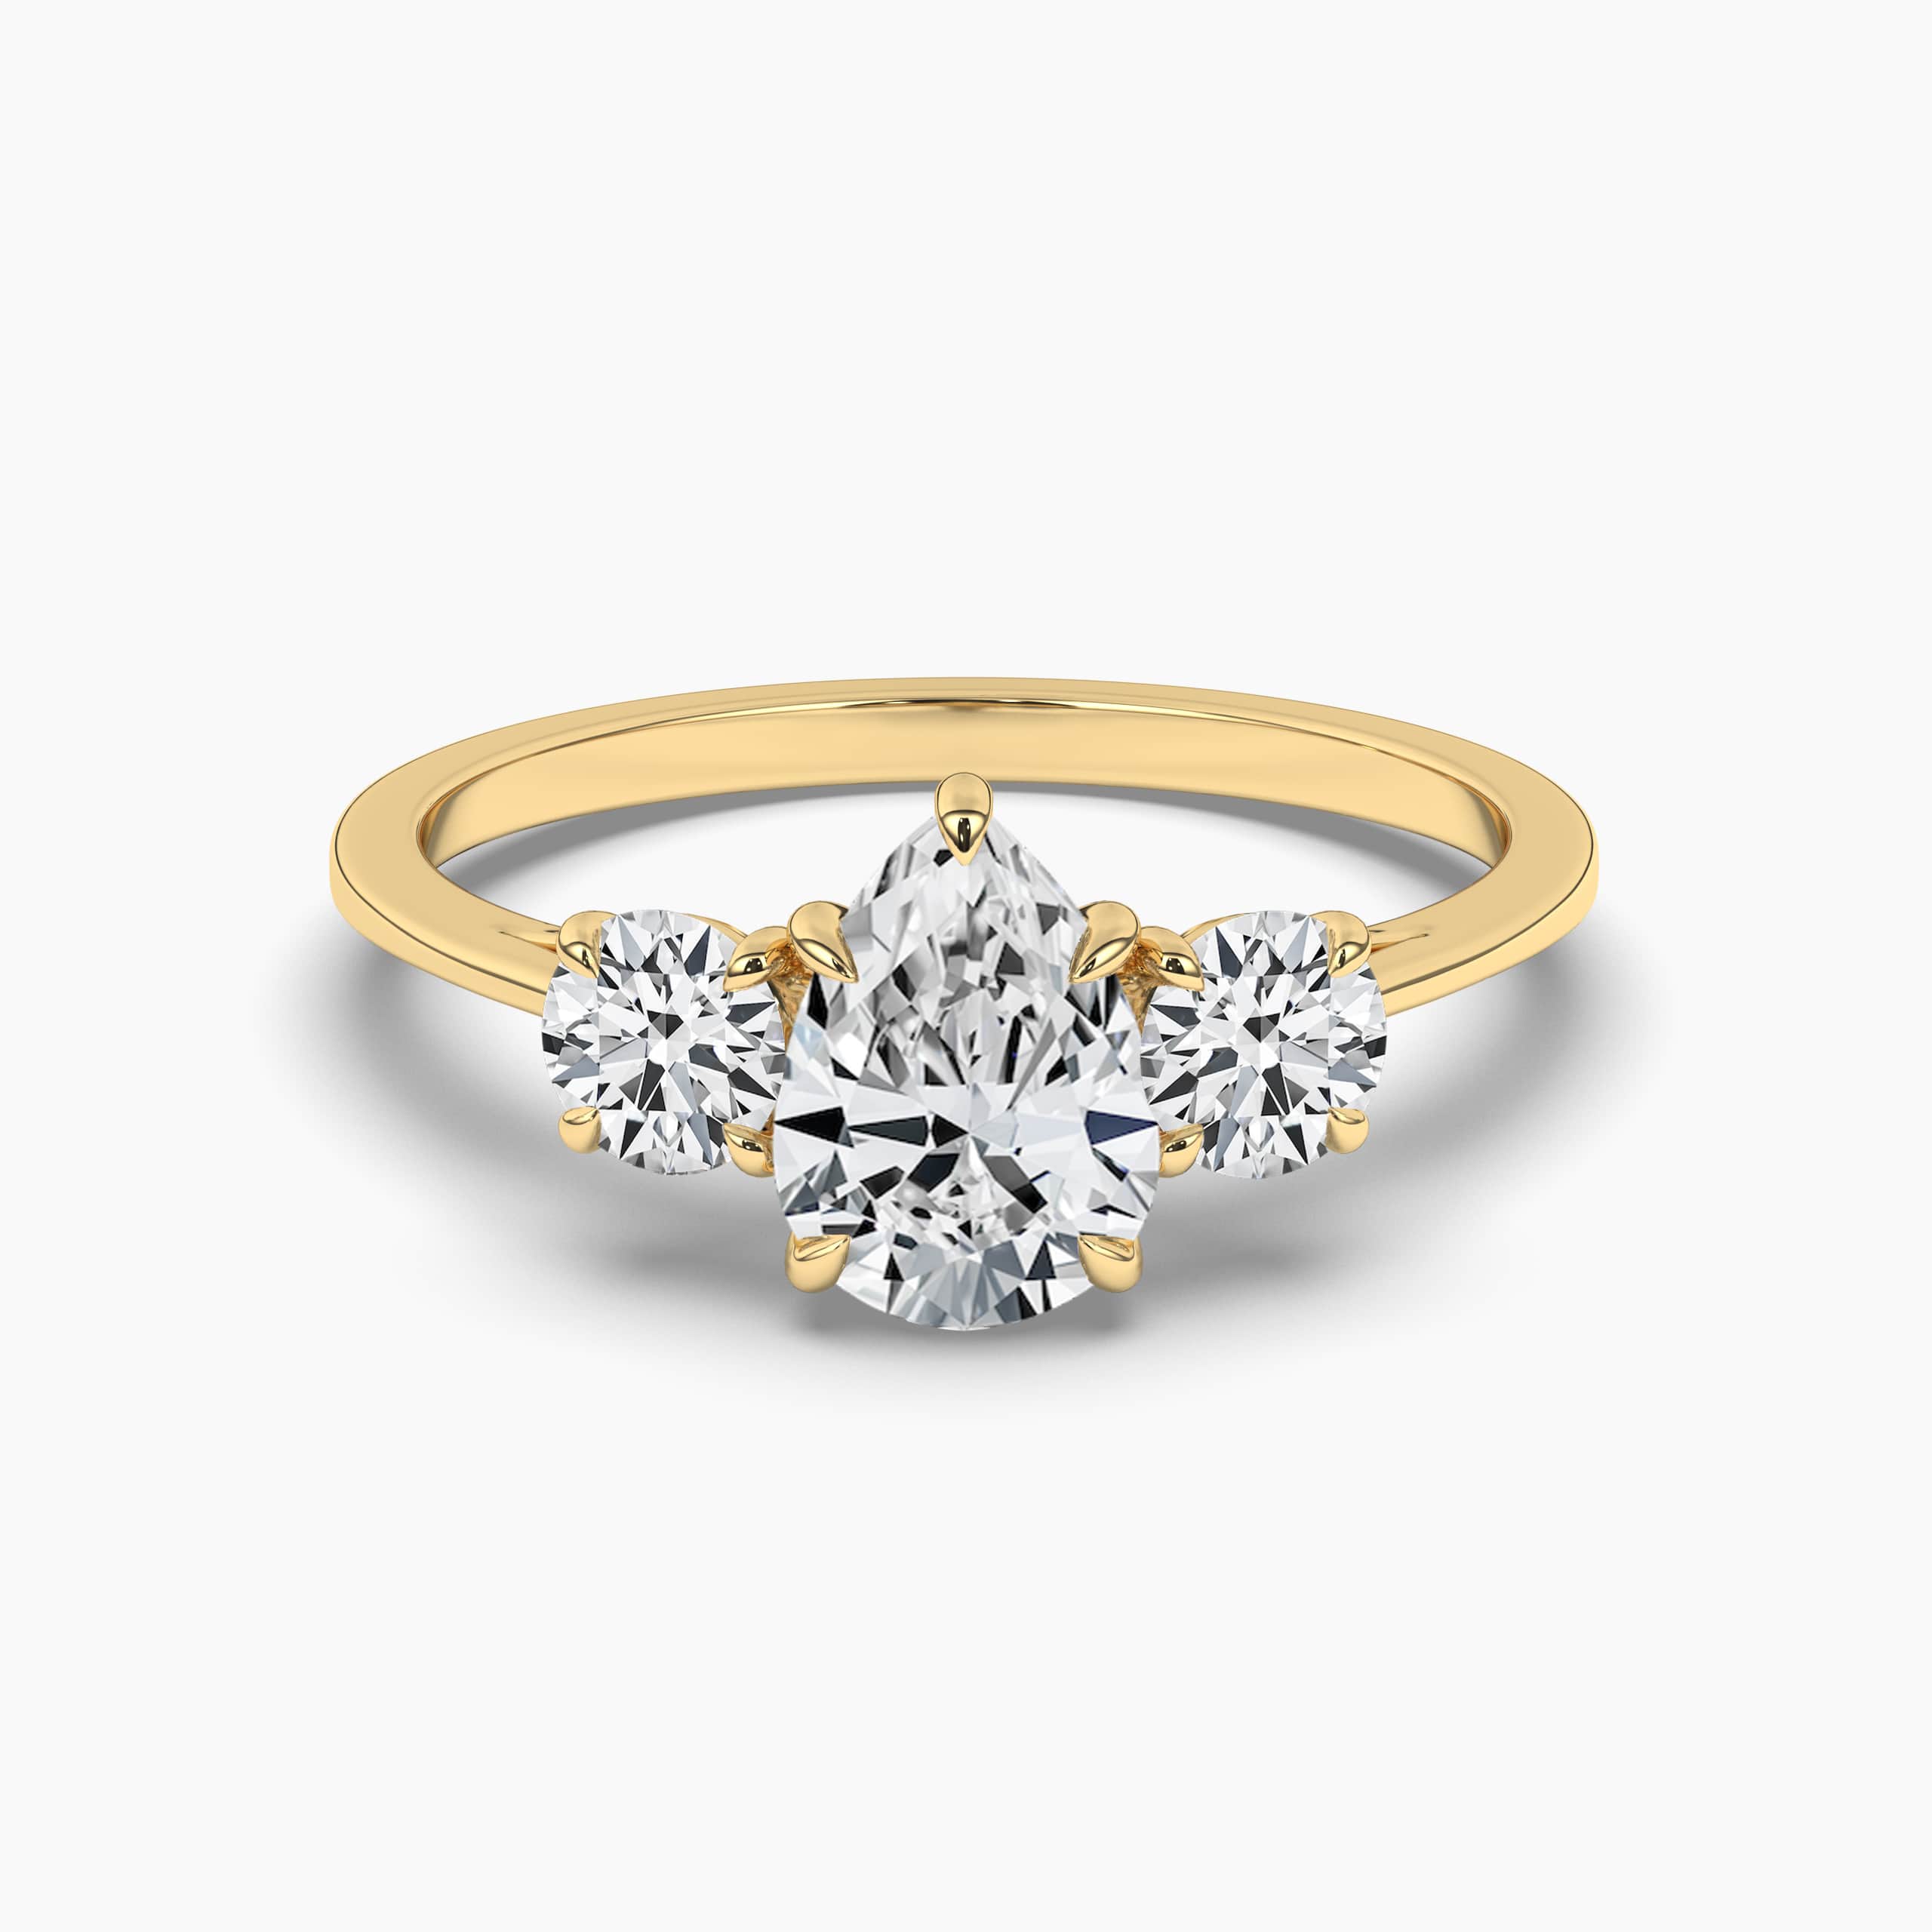 The Three Stone Pear Engagement Ring